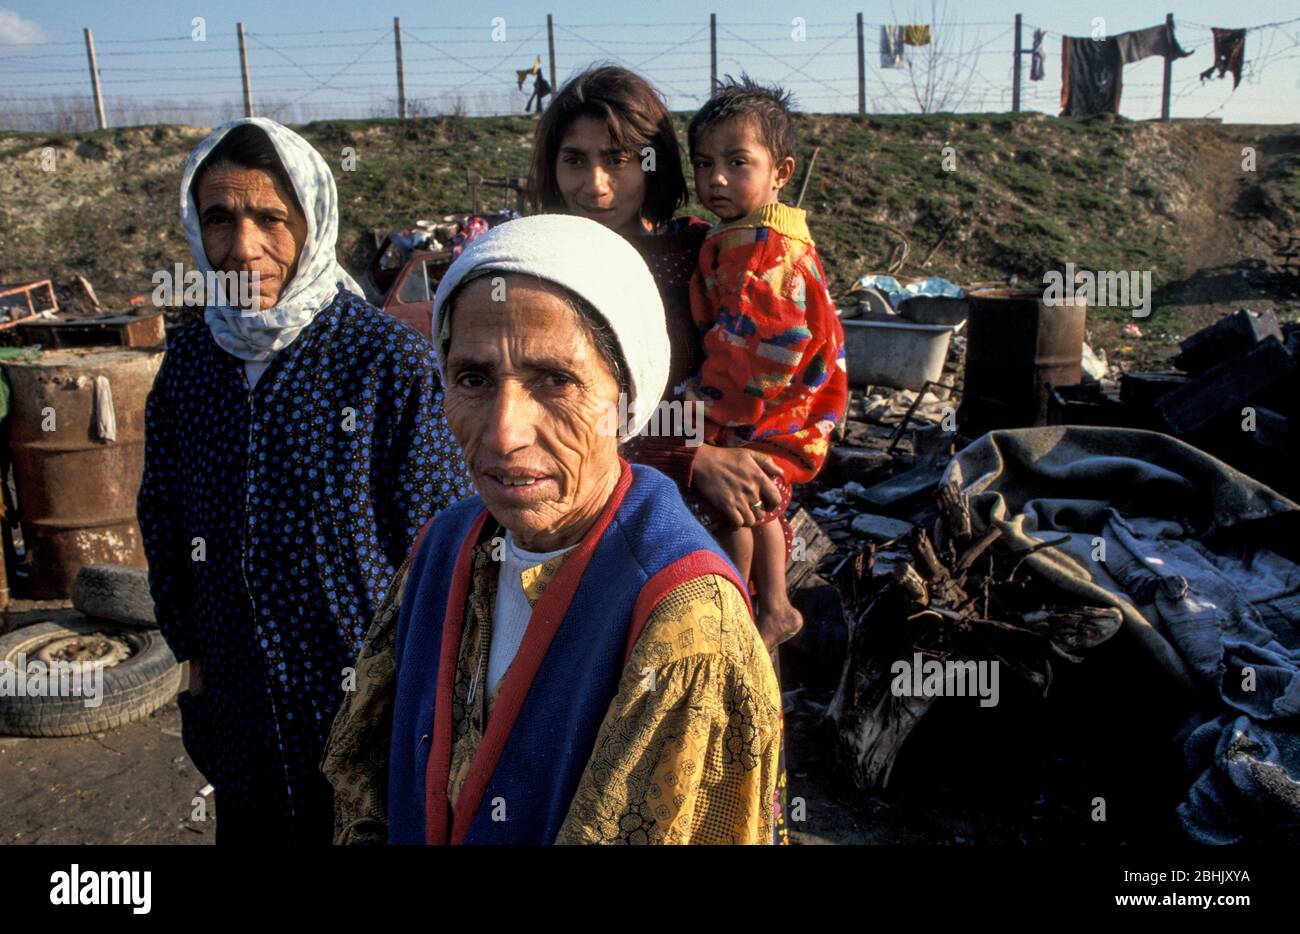 Roma family living in squalid conditions at the Vardarishte landfill site by the Vardar river in Skopje, Macedonia. The Roma have built shacks by the dump and rummage through the waste in which they live in, sometimes finding plastic or metal they can sell. Stock Photo